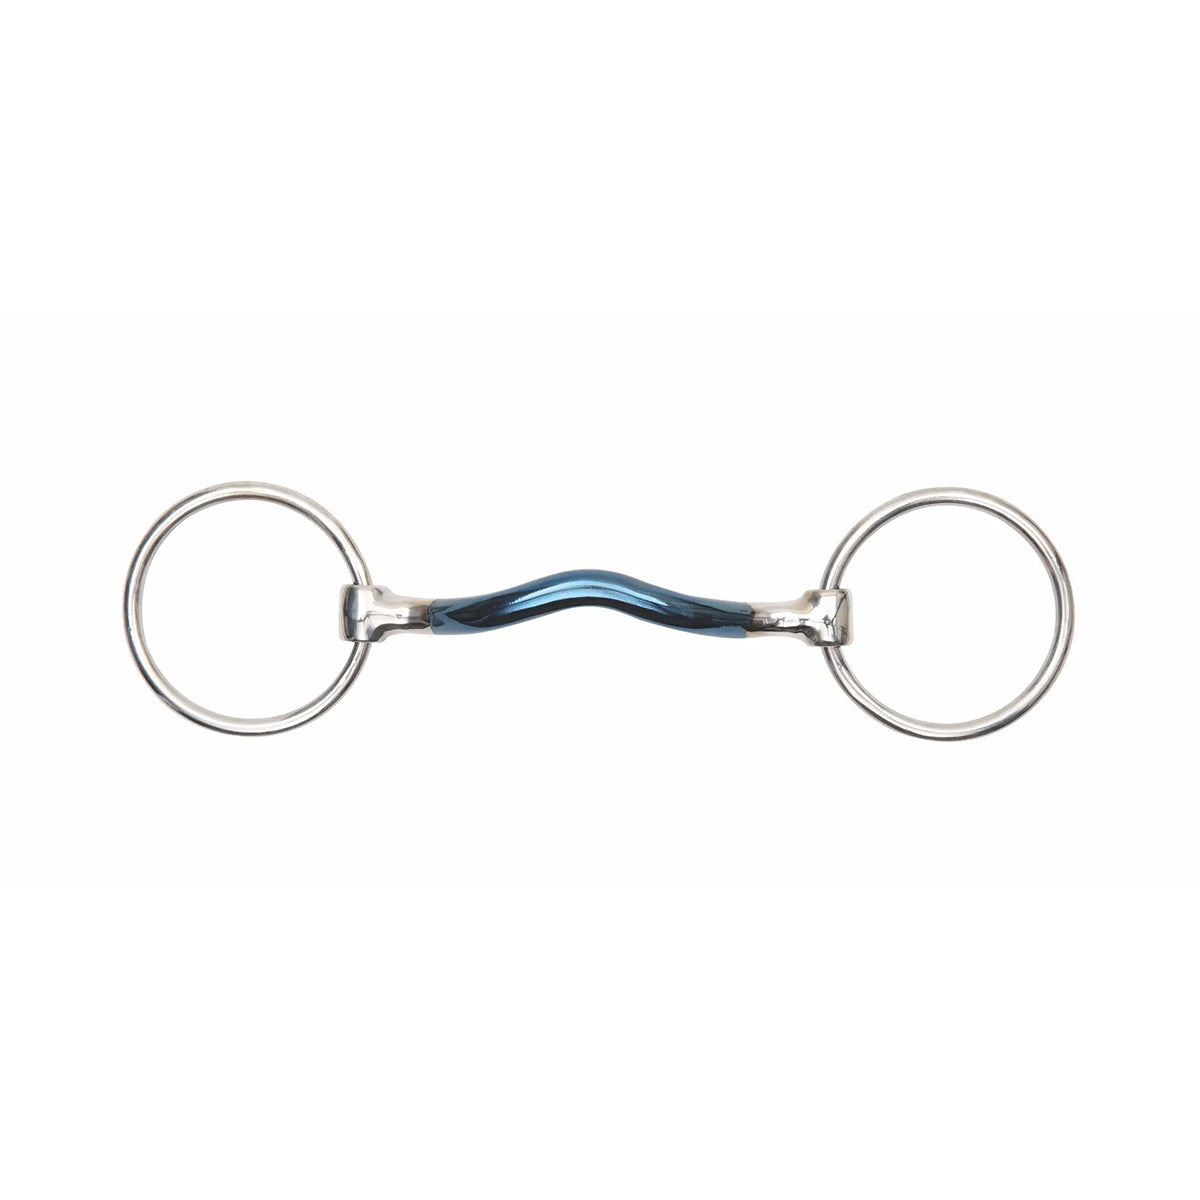 Shires Blue Alloy Mullen Mouth Loose Ring Bit